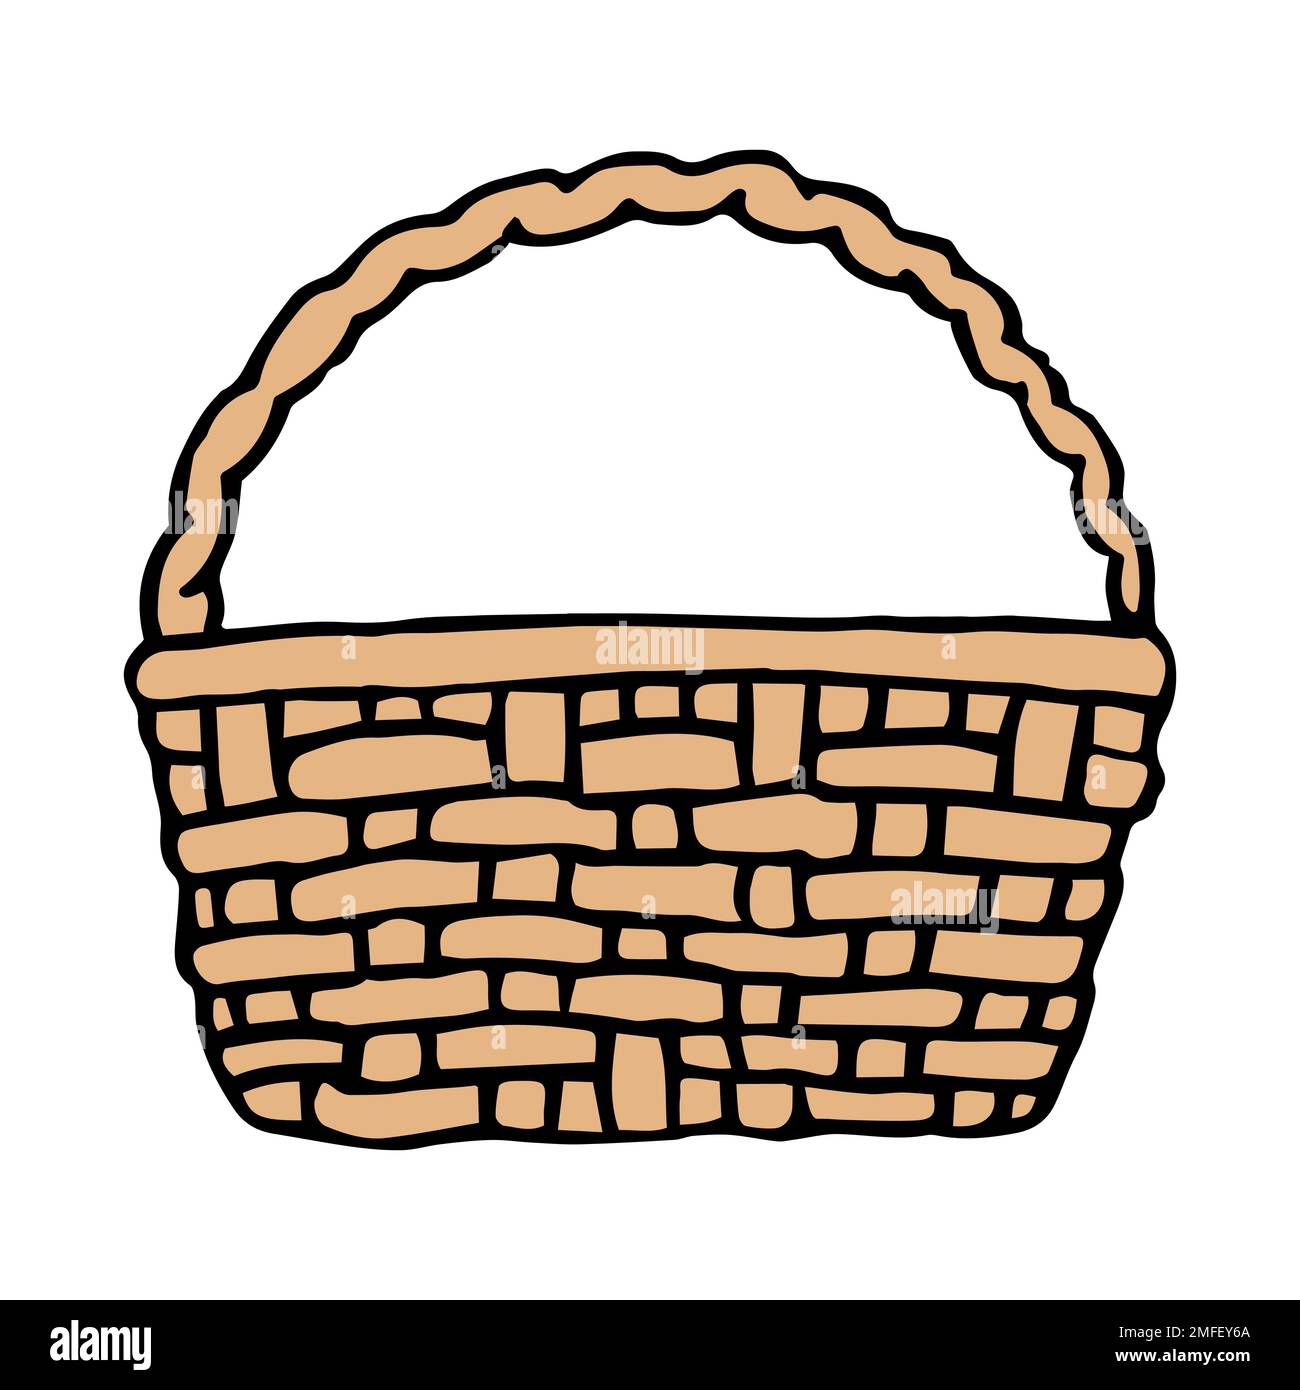 Straw basket in doodle style isolated on white background Stock Vector